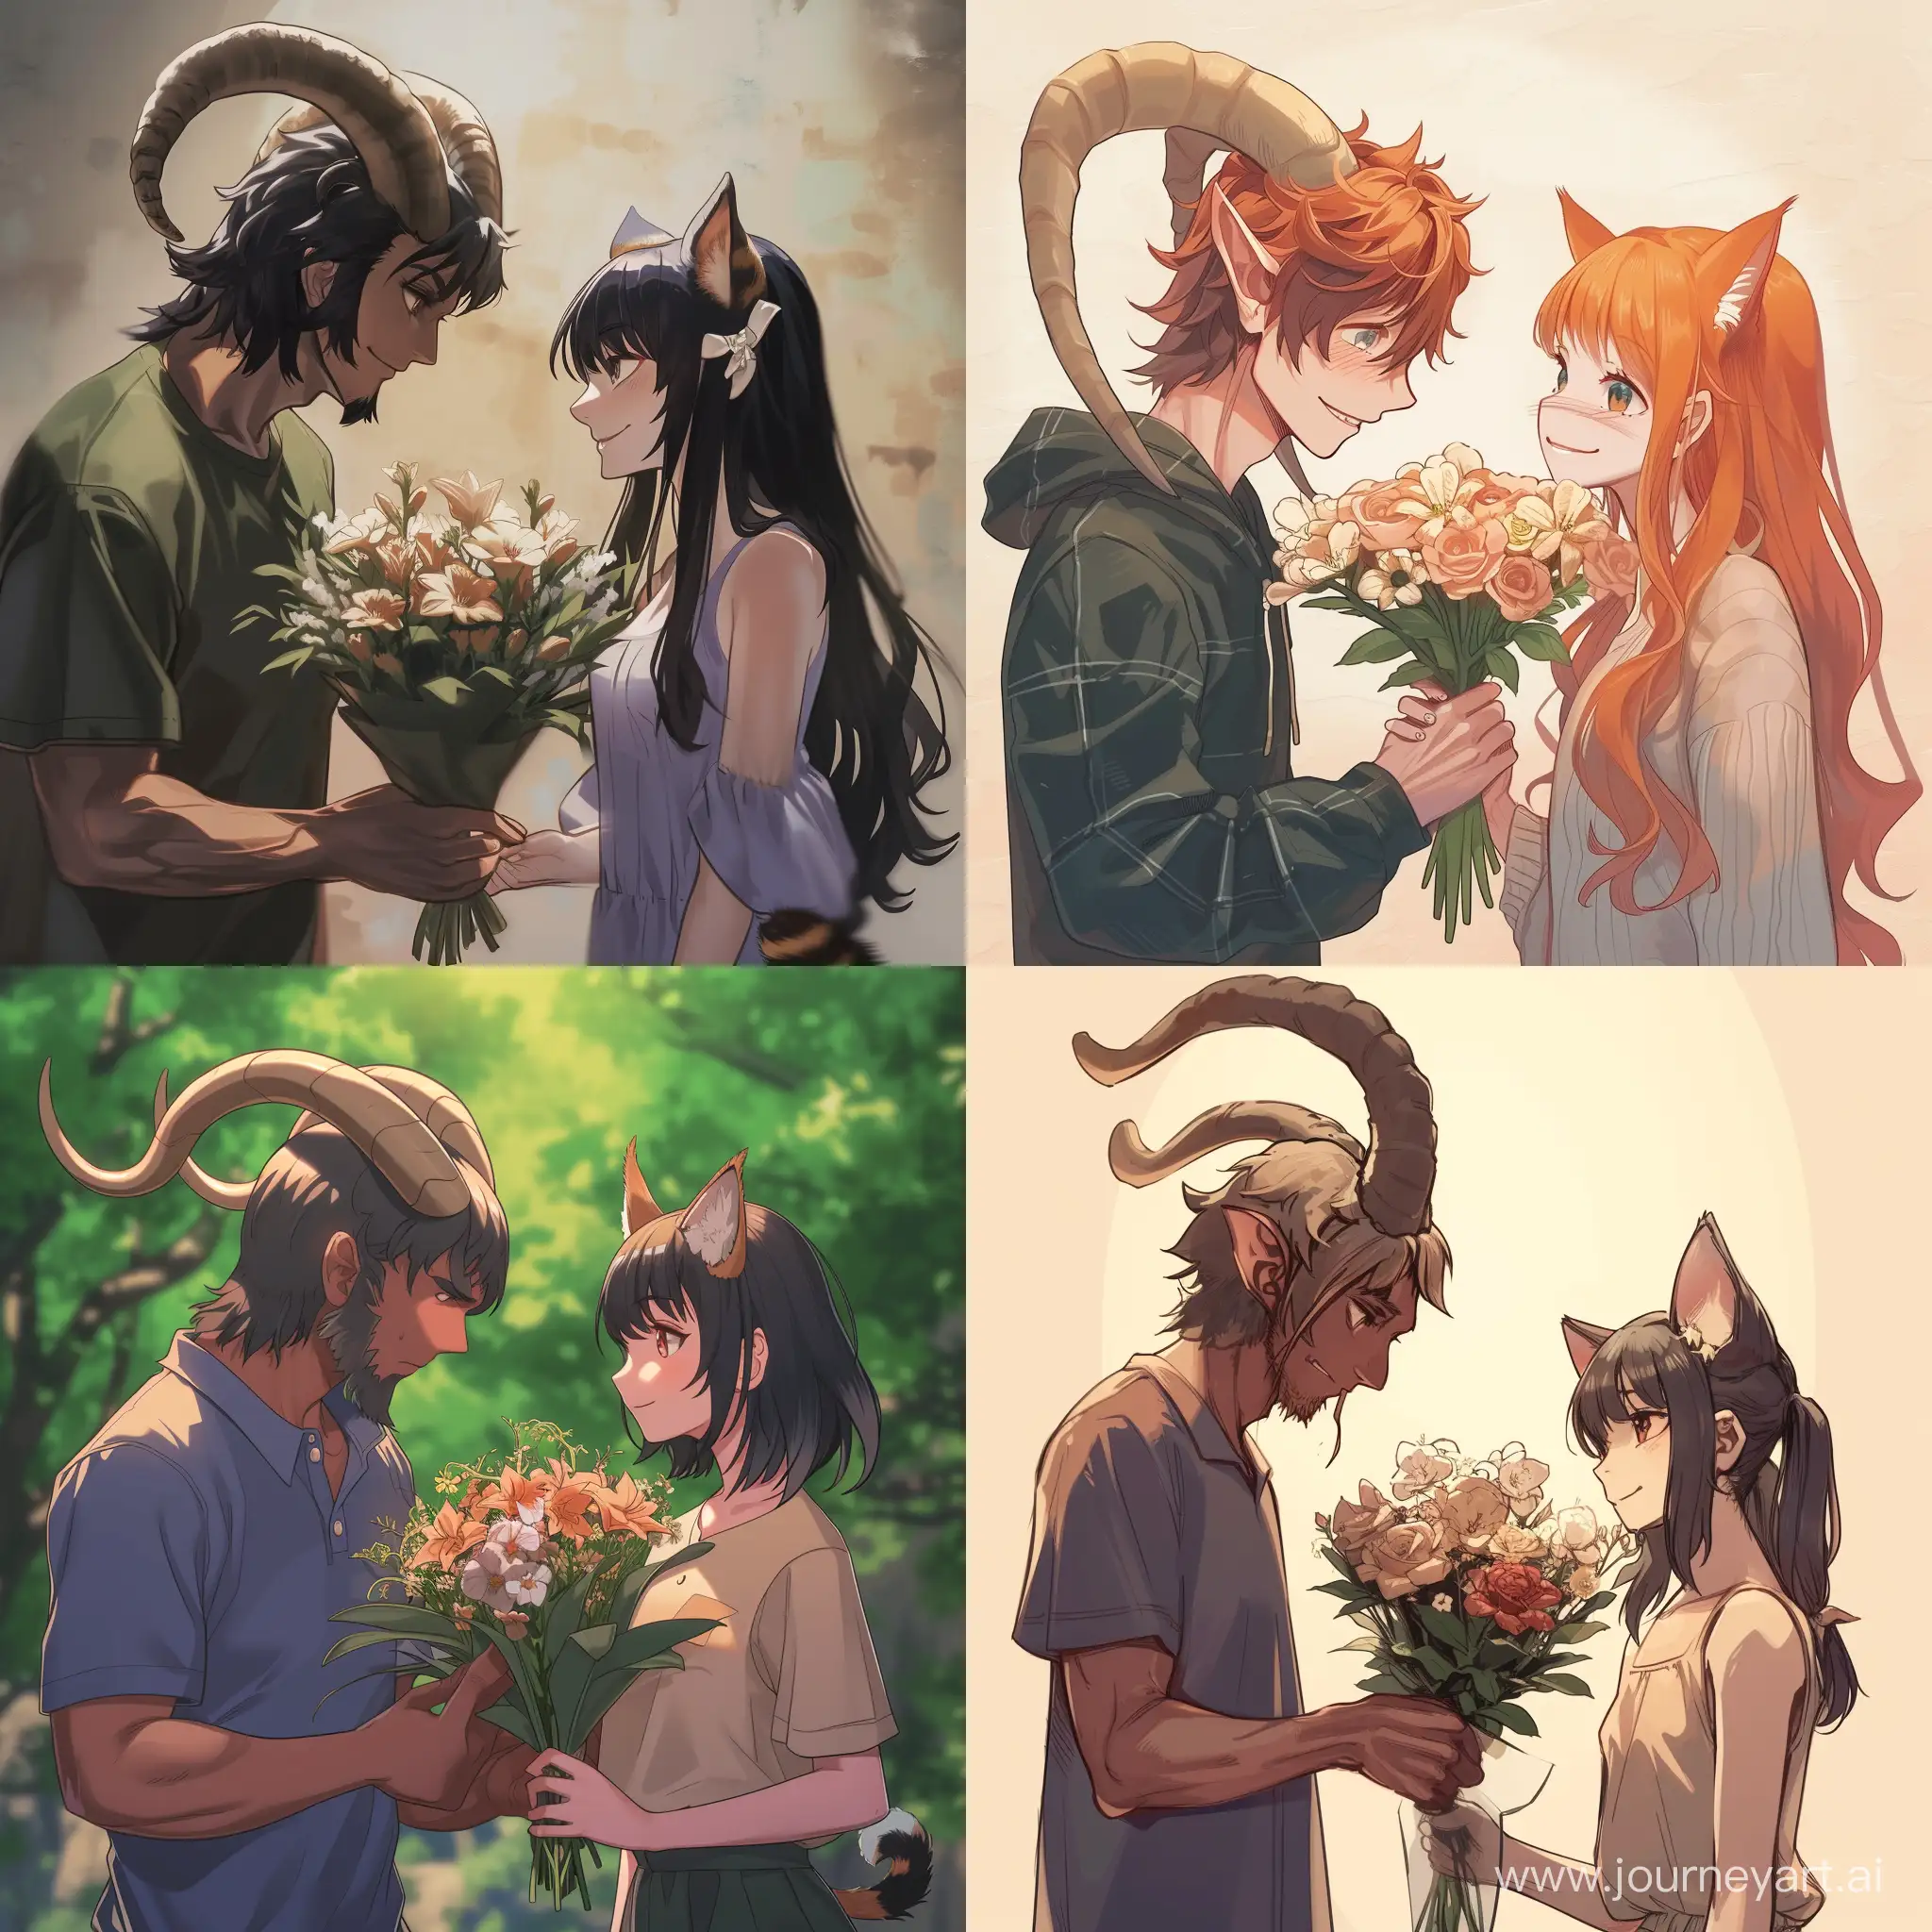 Fantasy-Anime-Character-with-Goat-Horns-Presents-Flowers-to-CatGirl